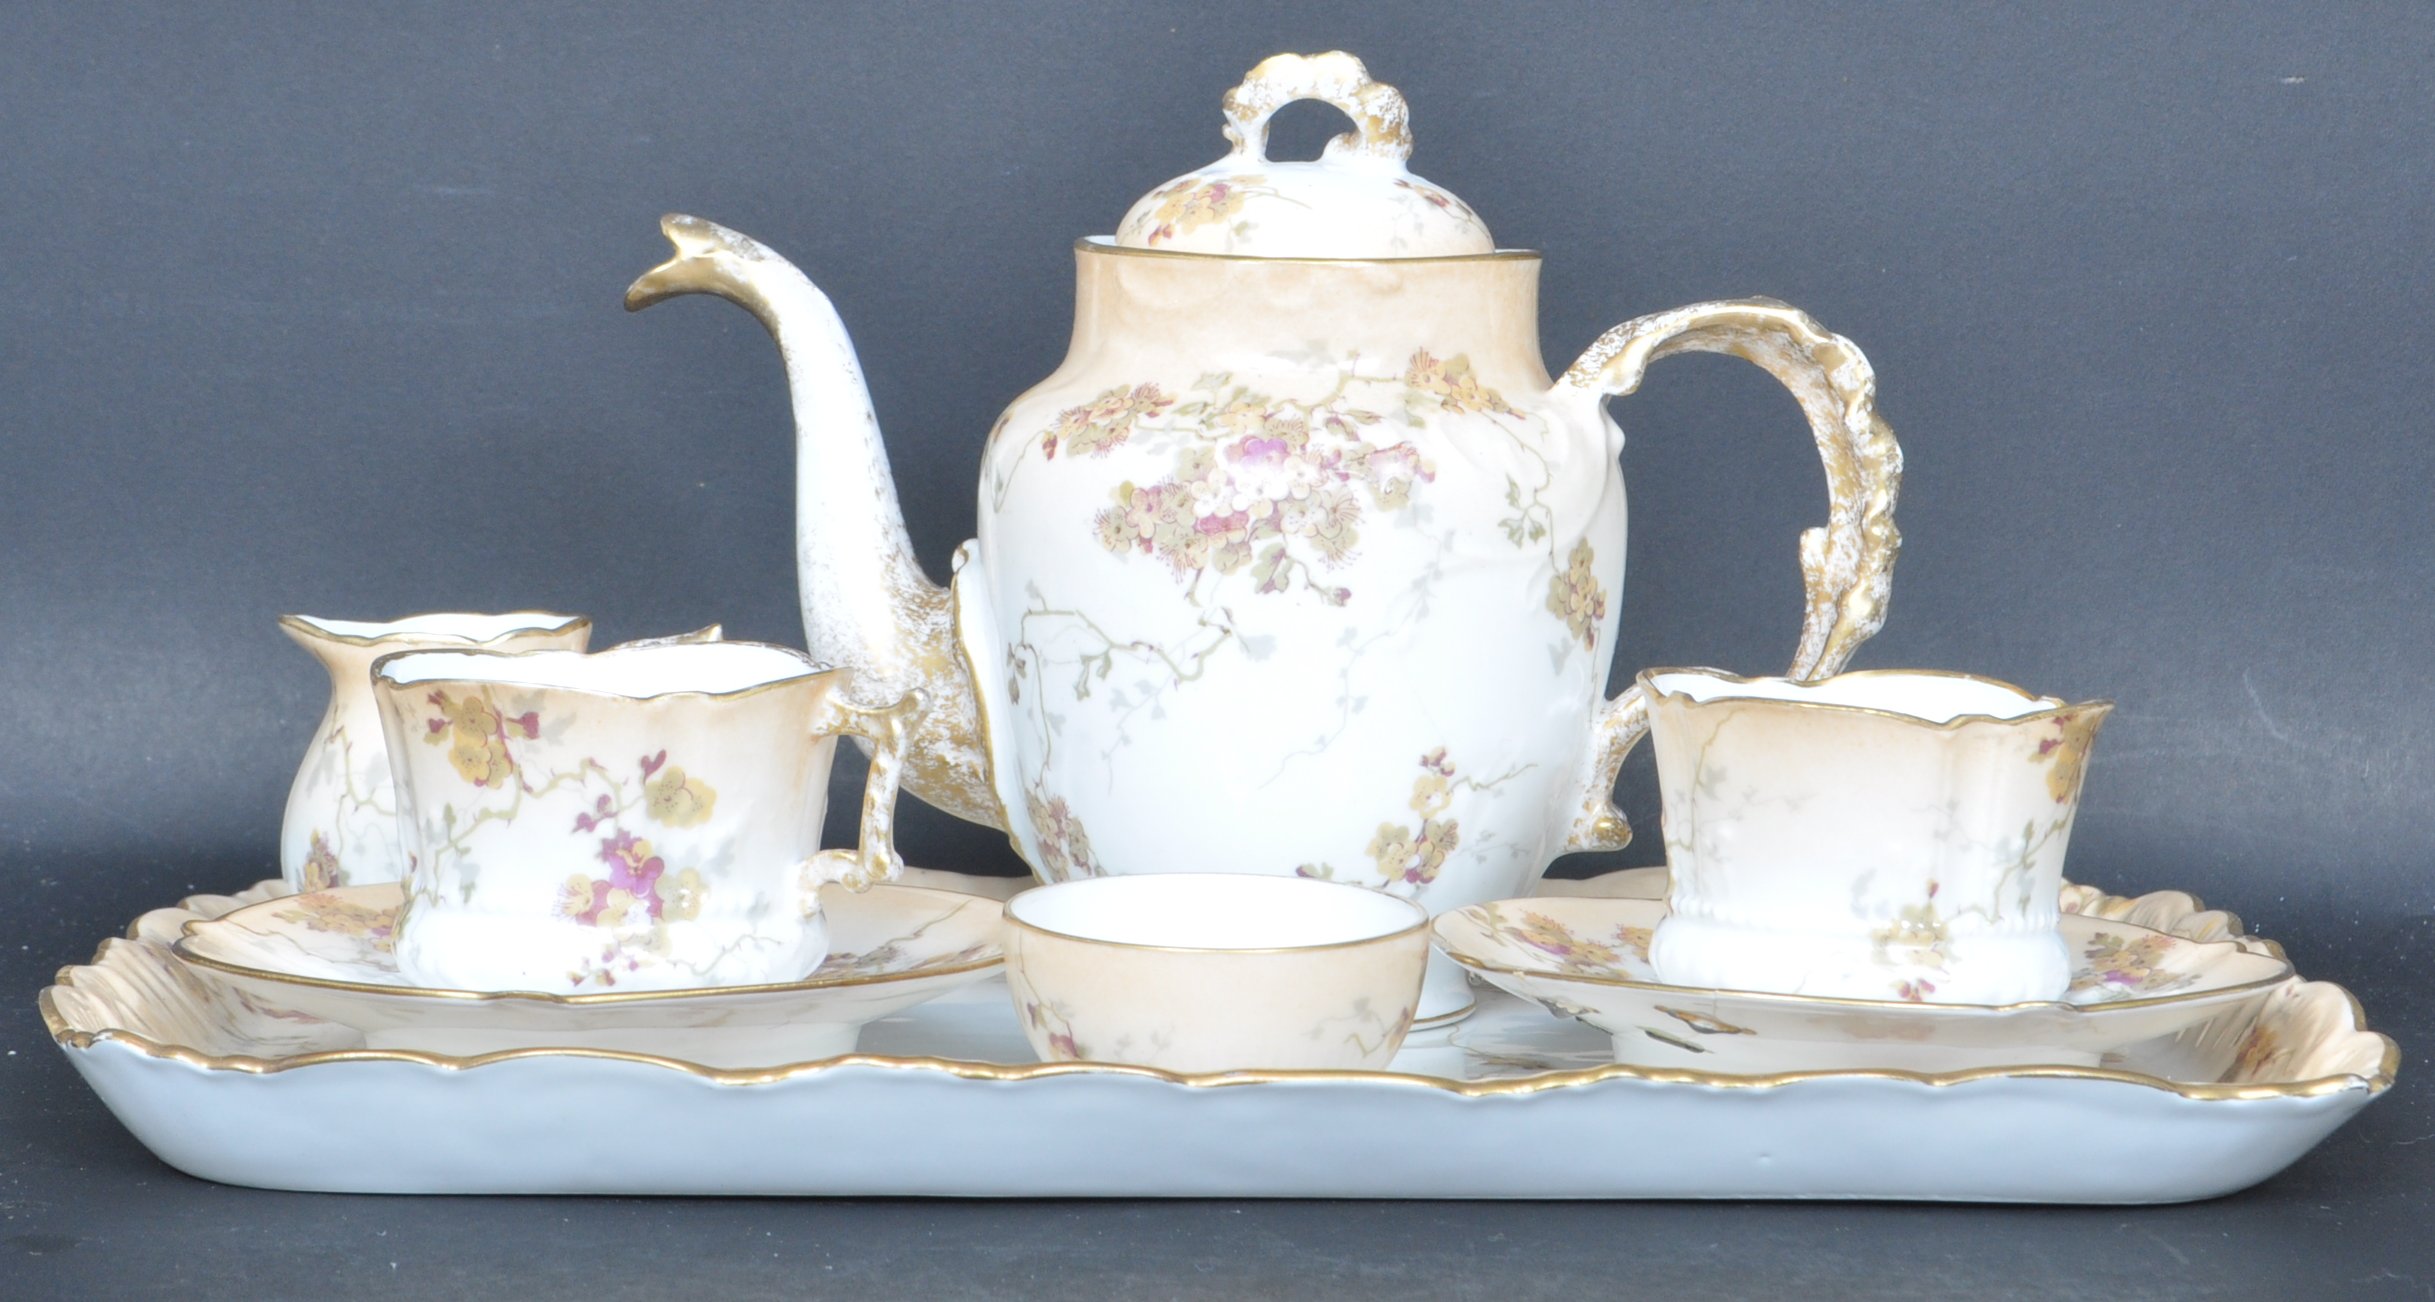 CIRCA 1900 LIMOGES 'TEA FOR TWO' CHINA SERVICE